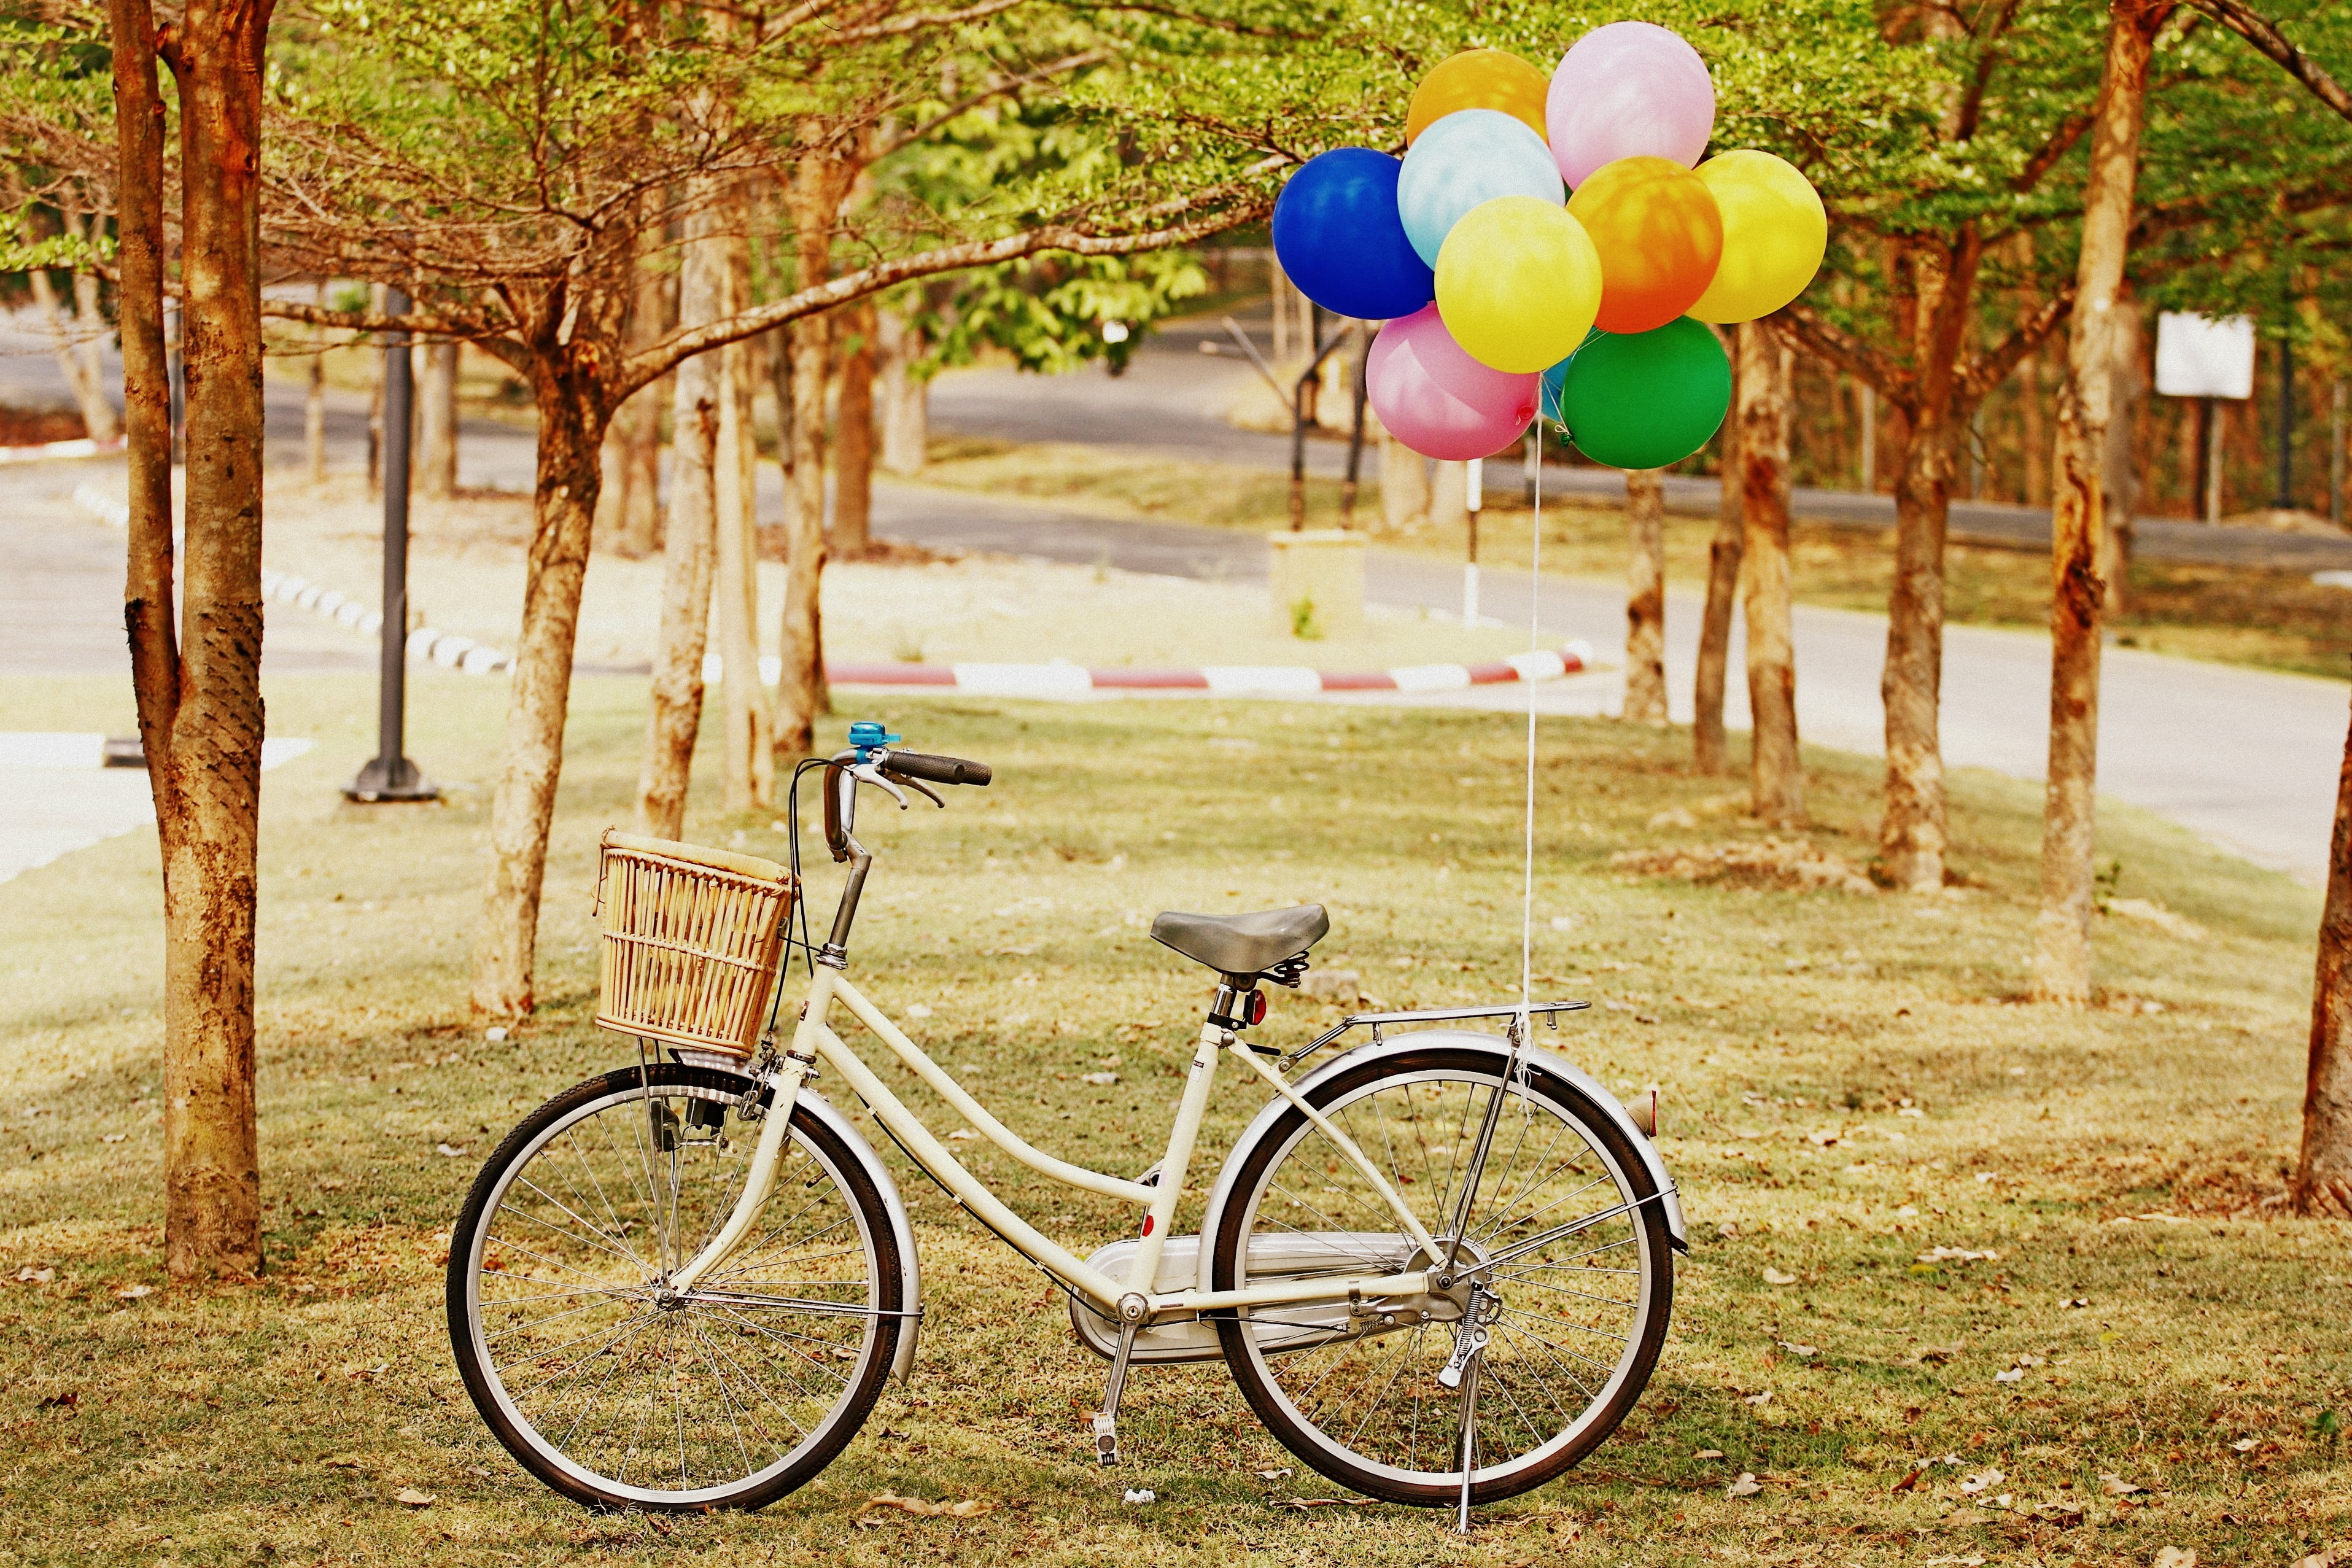 white bicycle, park, balloons, grass, outdoors, summer, retro Styled